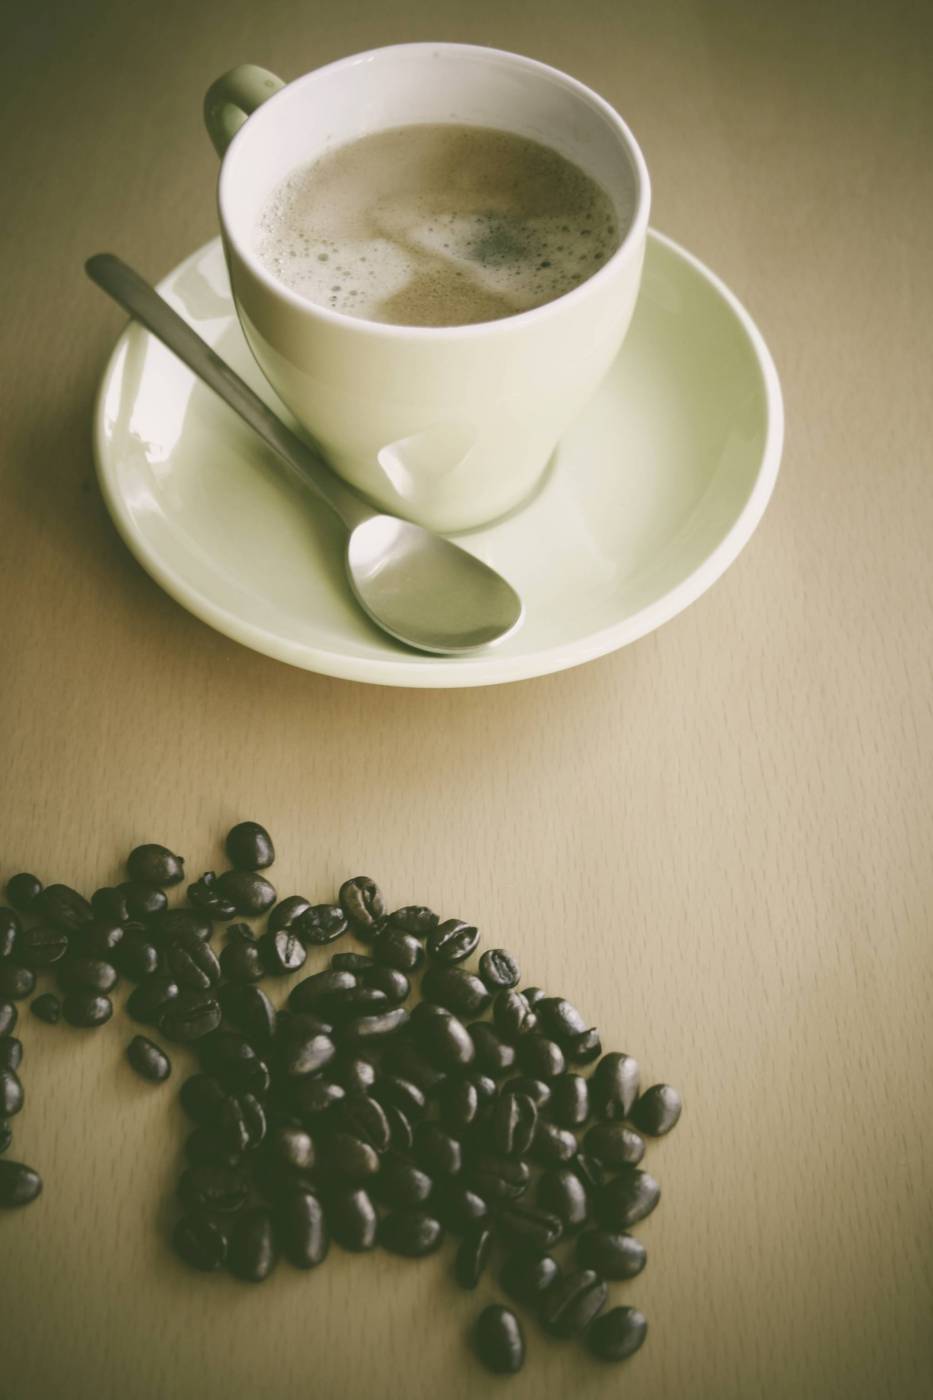 cup of coffee beans/ picture